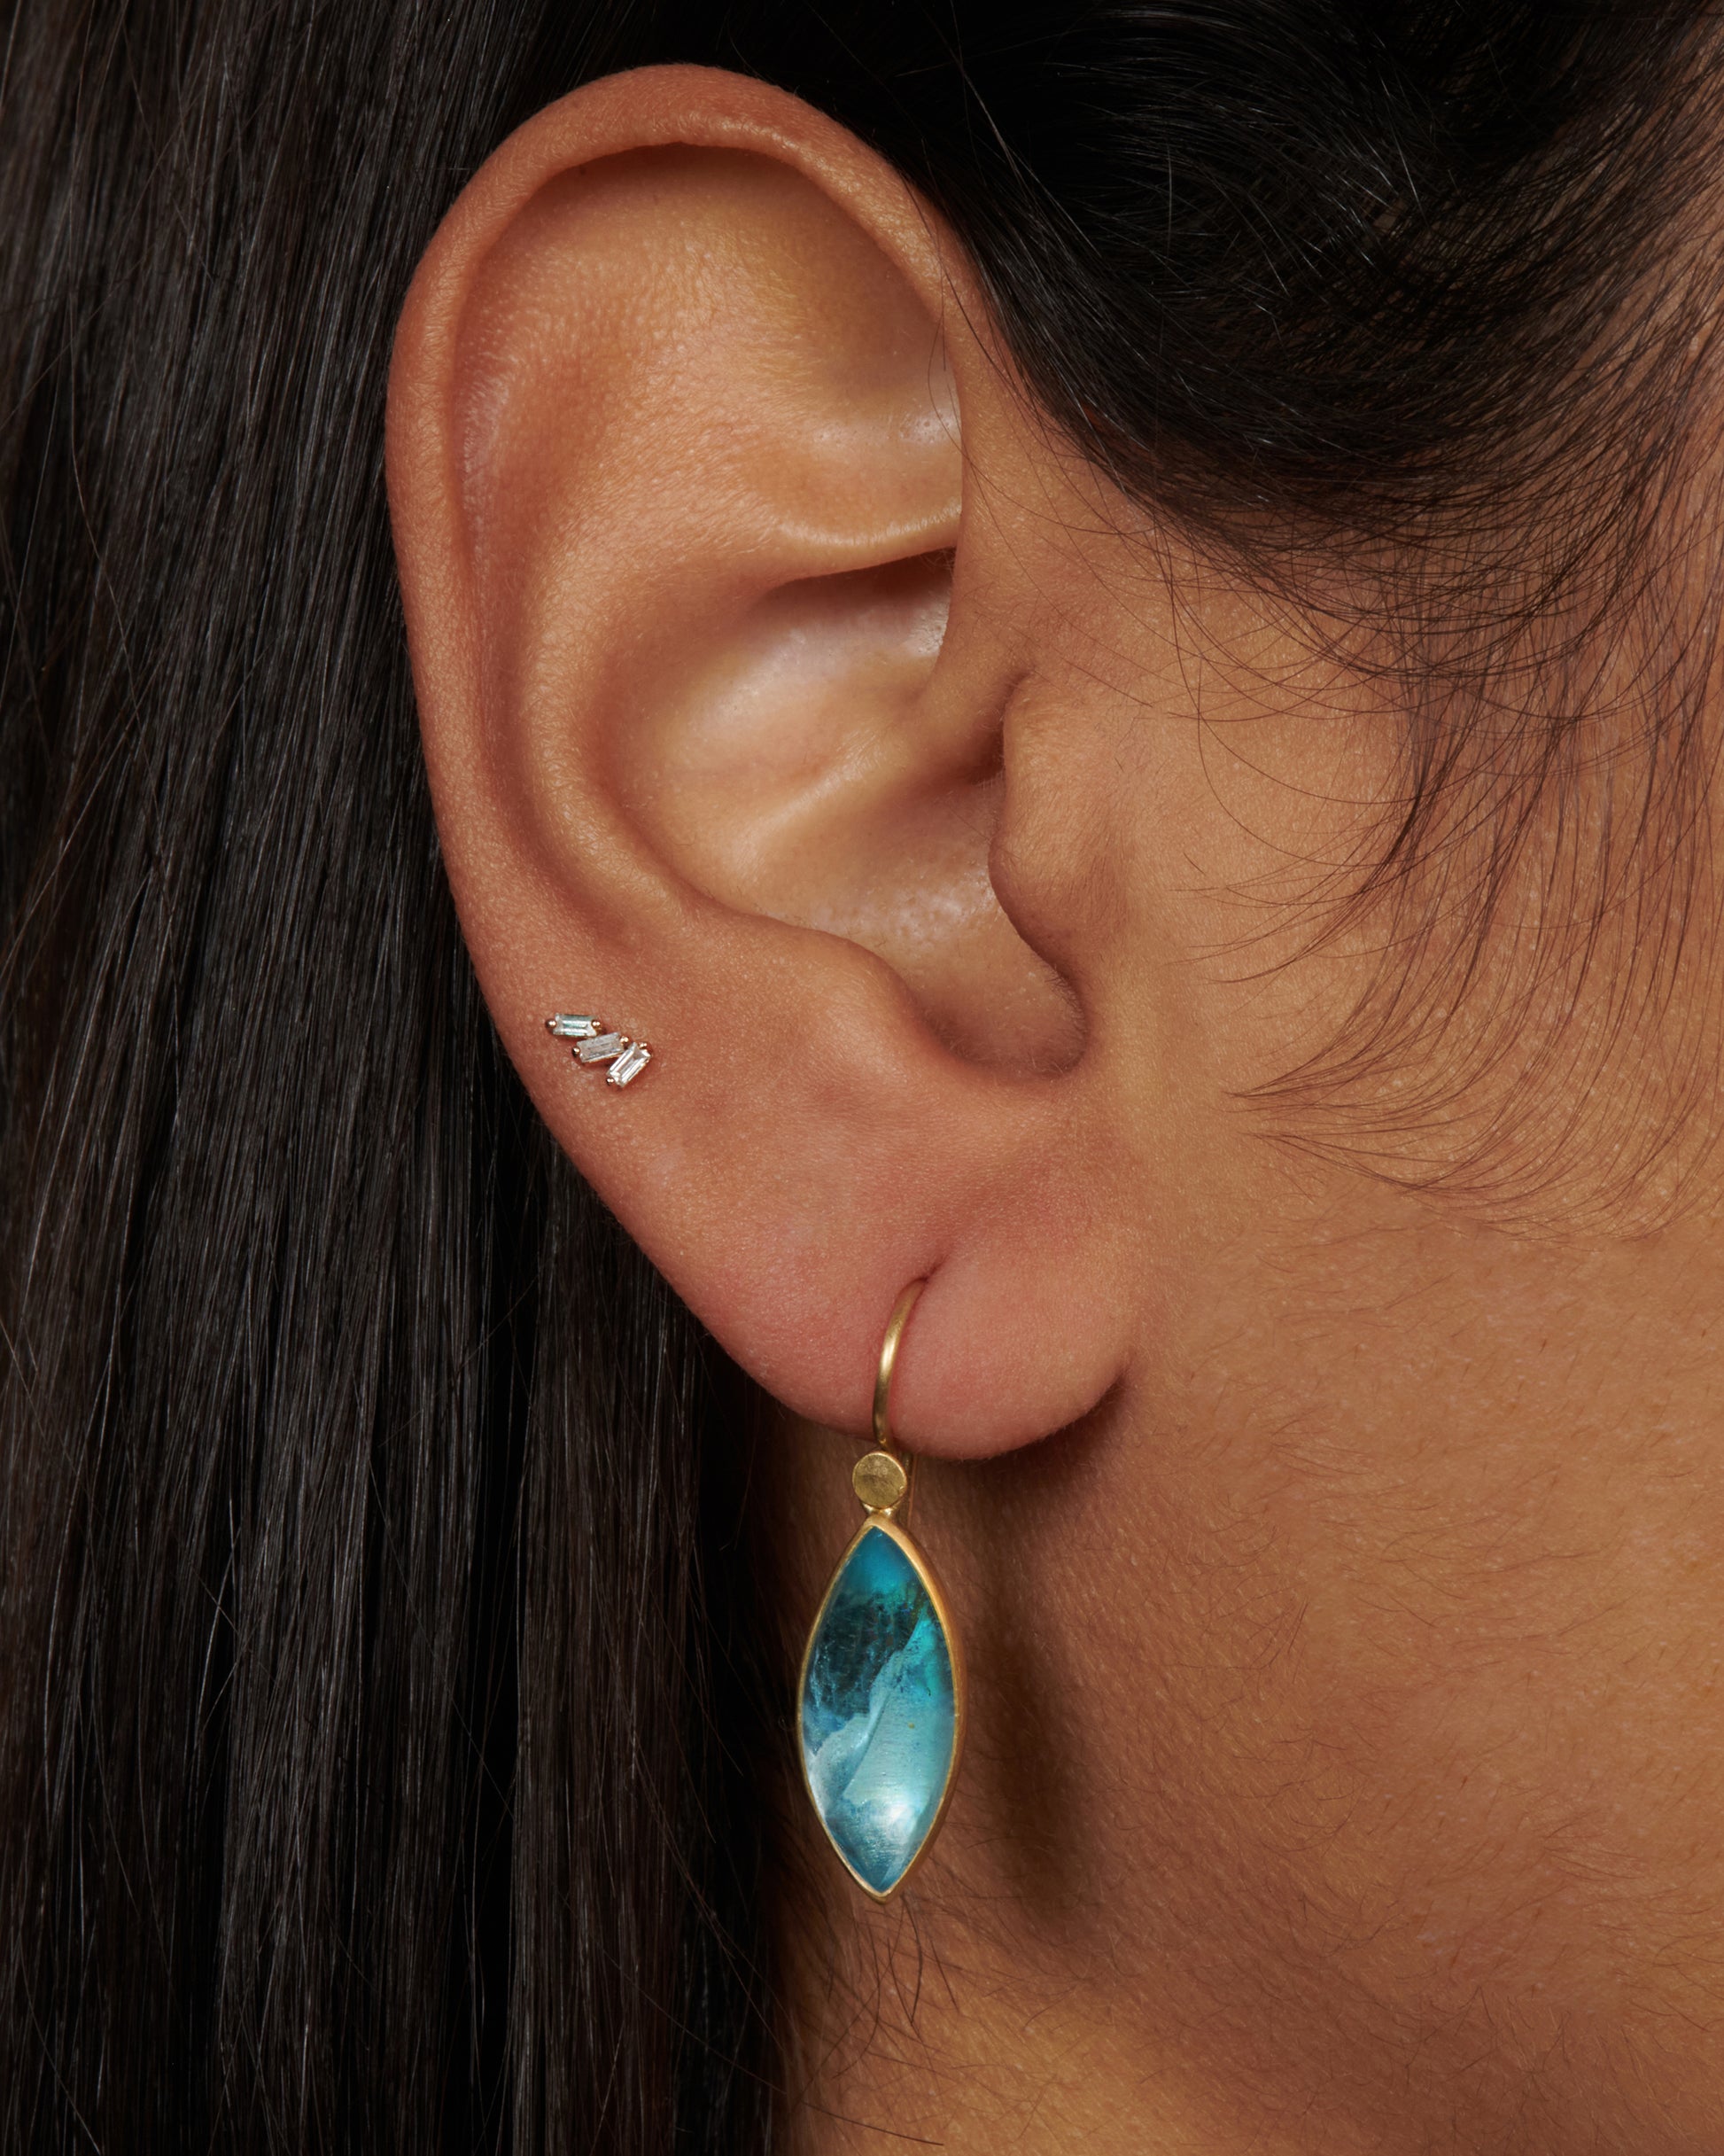 A pair of 18k gold dangling earrings with aquamarine navette drops. These elongated aquamarines contrast with any hair color, making them a versatile and gorgeous pop of color while wearing your hair up or down.